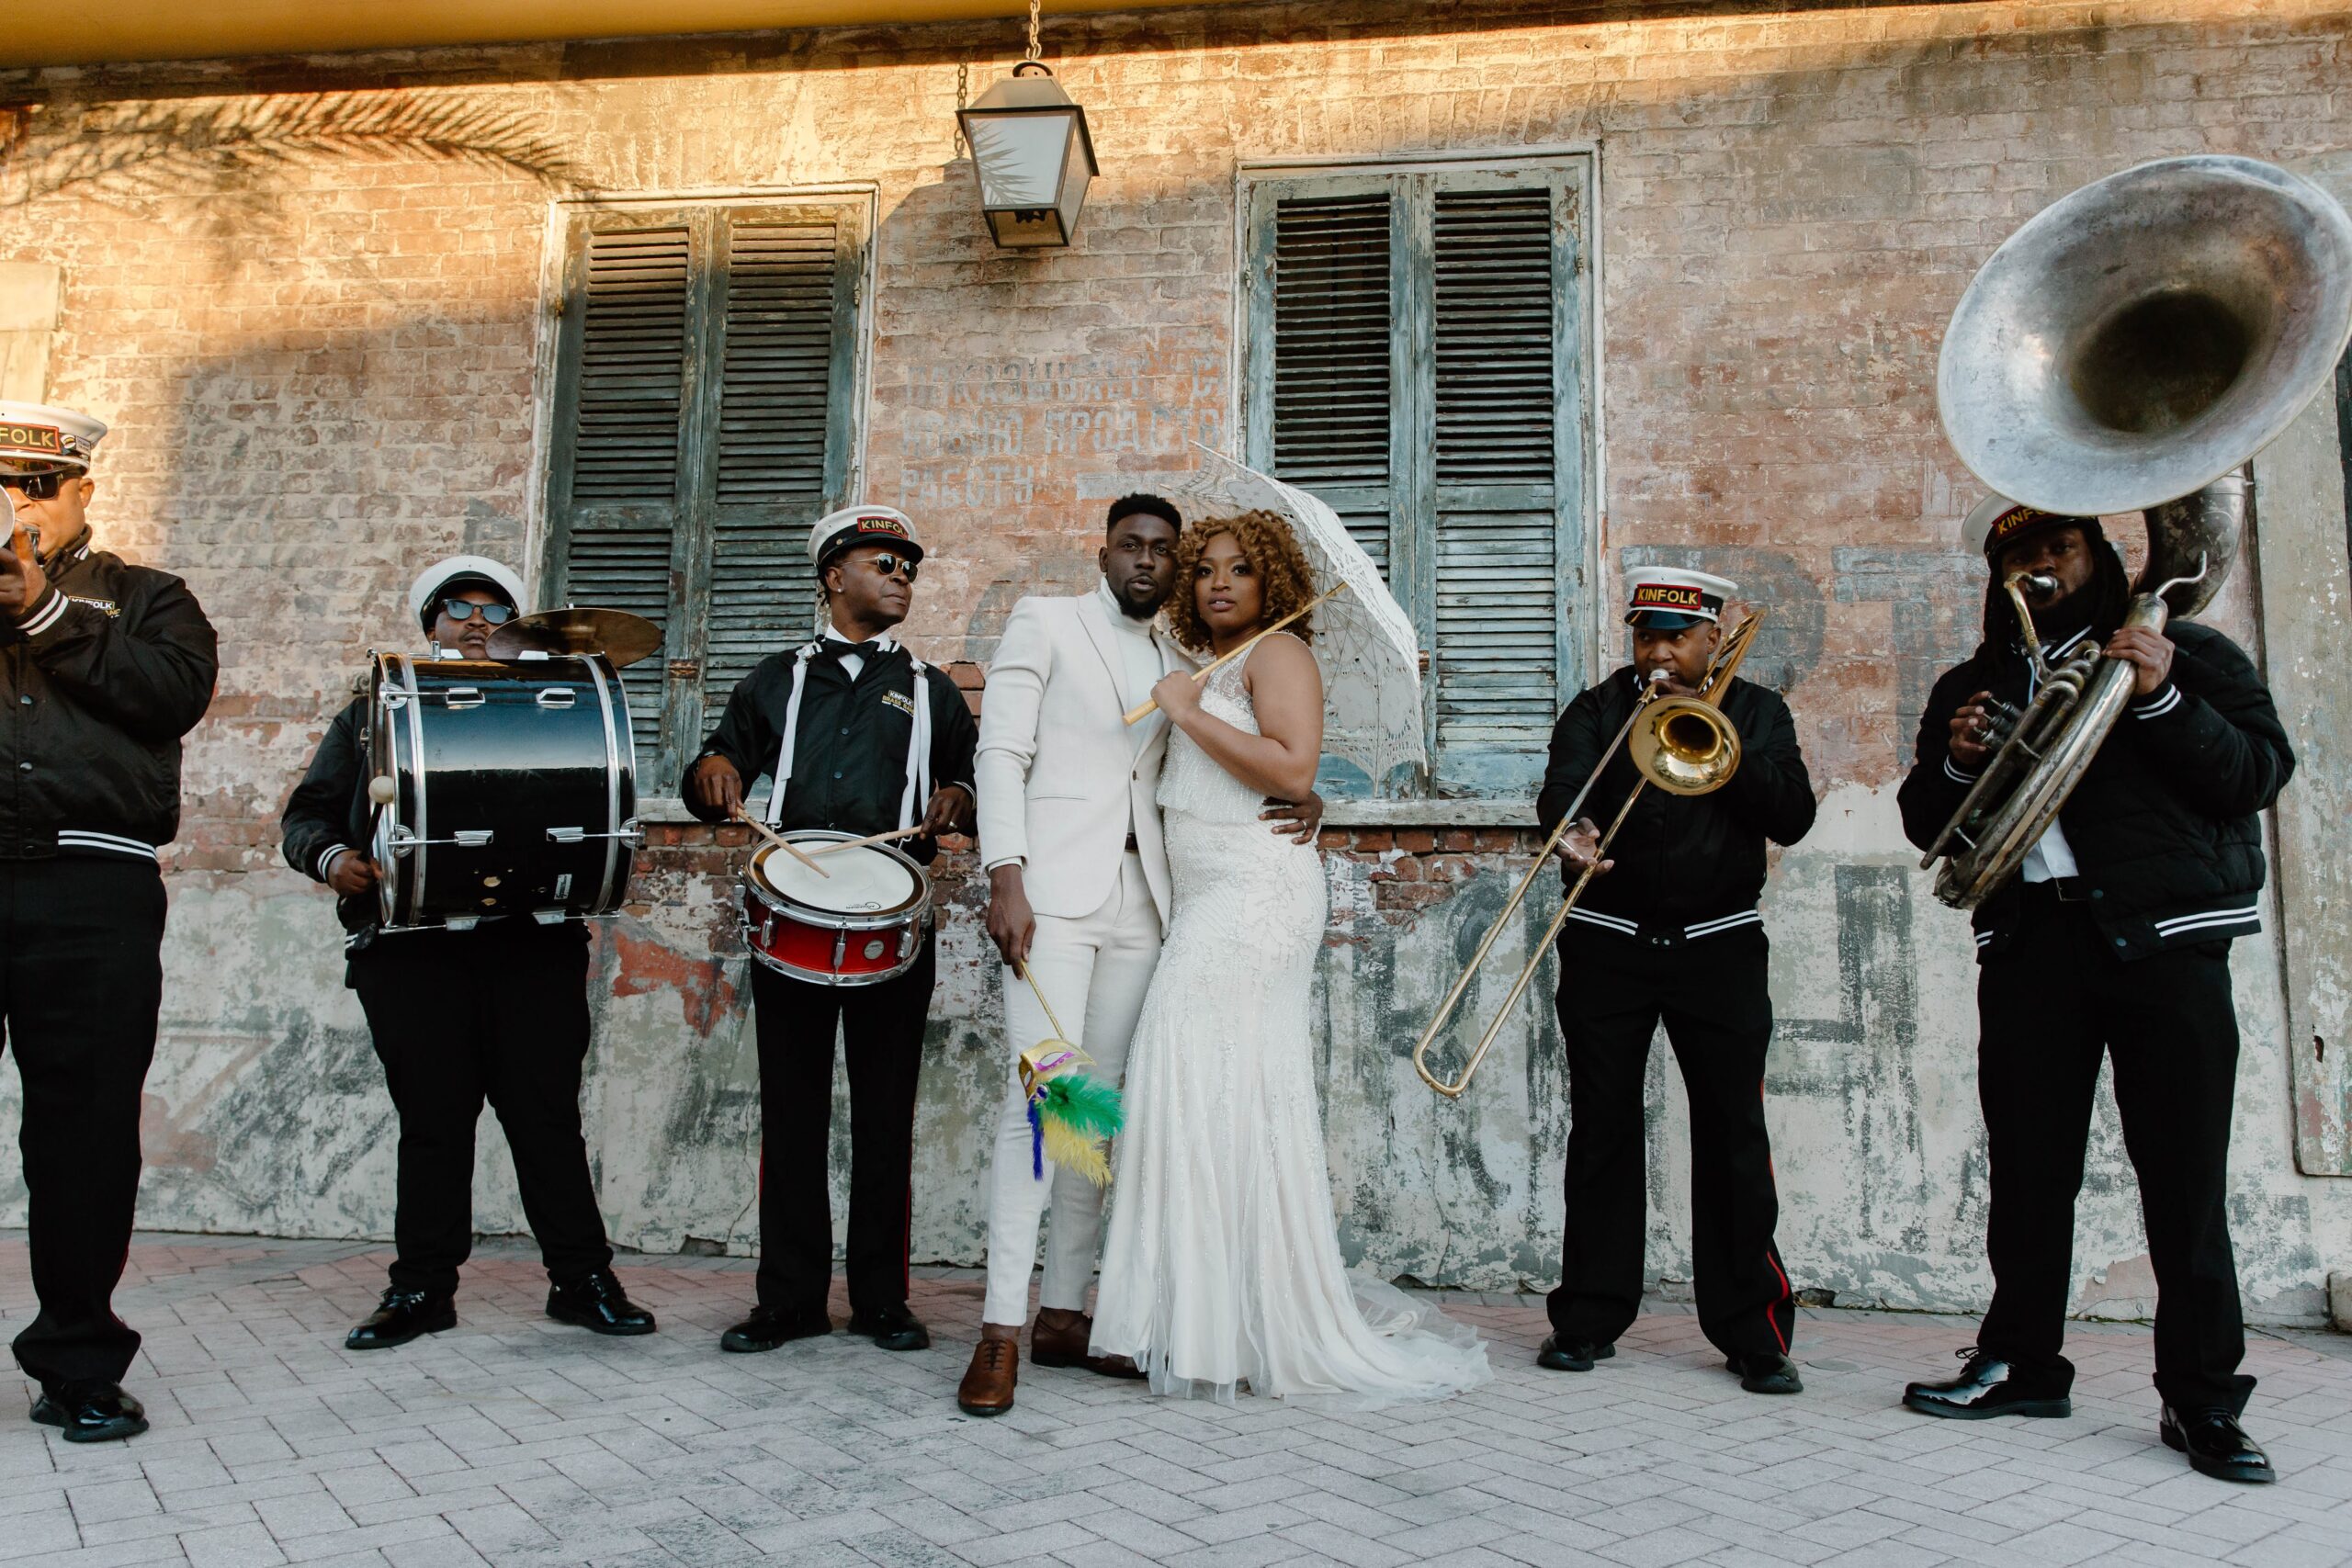 A couple standing close together and wedding attire as they are surrounded by a brass band, and the woman is holding a parasol above her head, and the man is holding a Mardi Gras mask during their urban New Orleans elopement